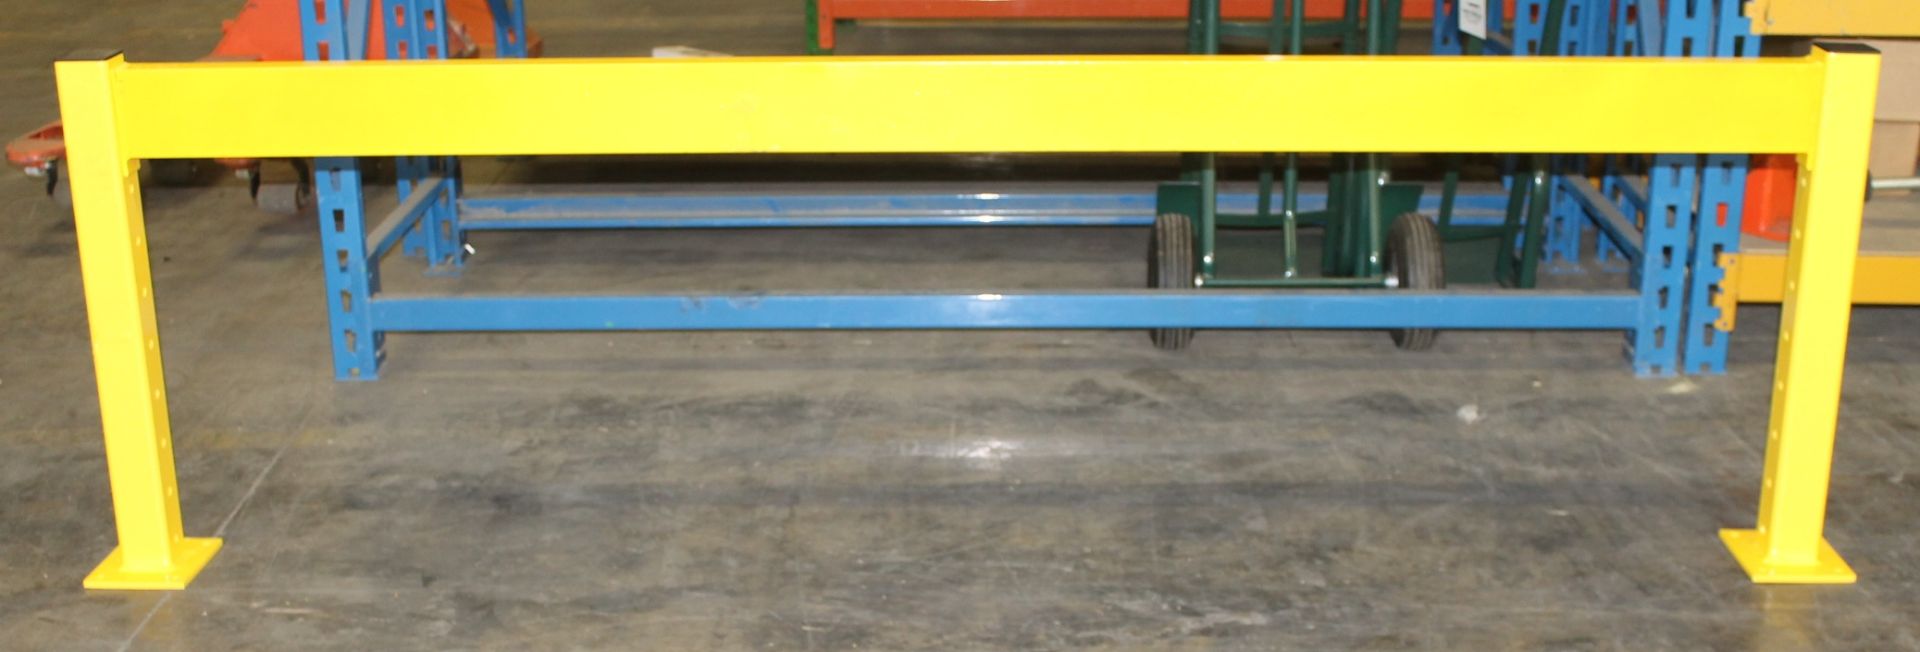 48.75 FT LONG AND 28" TALL GUARD RAIL,  OVERALL SIZE OF ONE SECTION: 100"W X 5"T X 2"D, INCLUDES: - Image 4 of 4